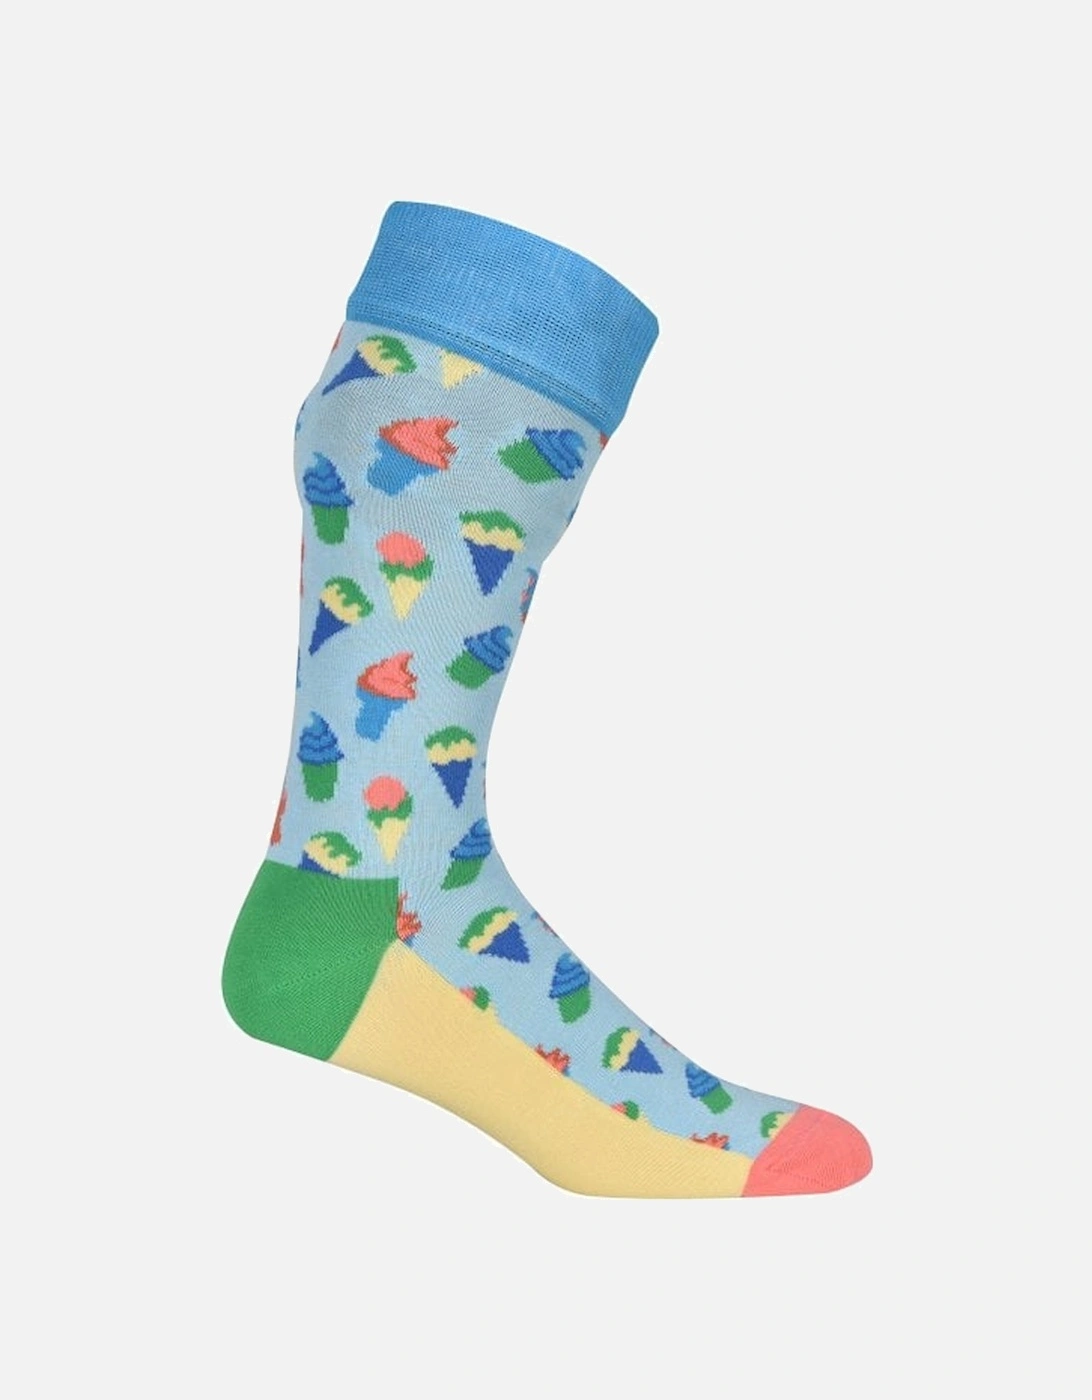 4-Pack Tropical Day Socks Gift Box, Navy/blue/pink